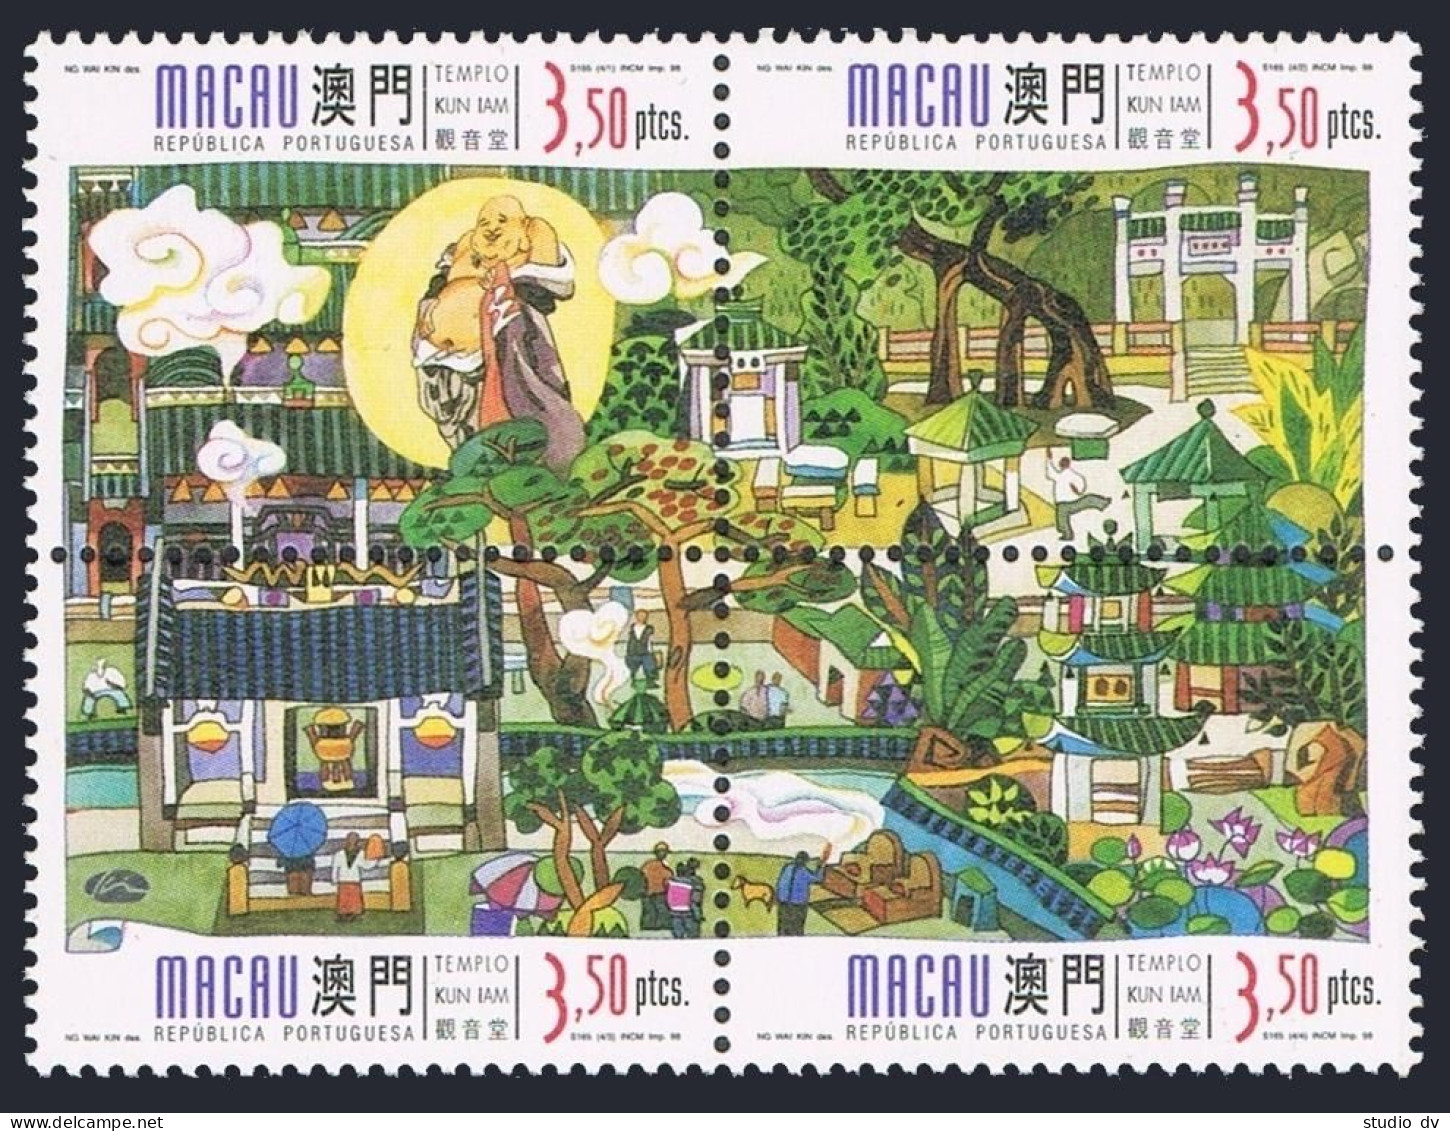 Macao 952-955a Block,956,956a Overprinted,MNH. Kun Iam Temple,1998.Table,Chairs, - Nuevos